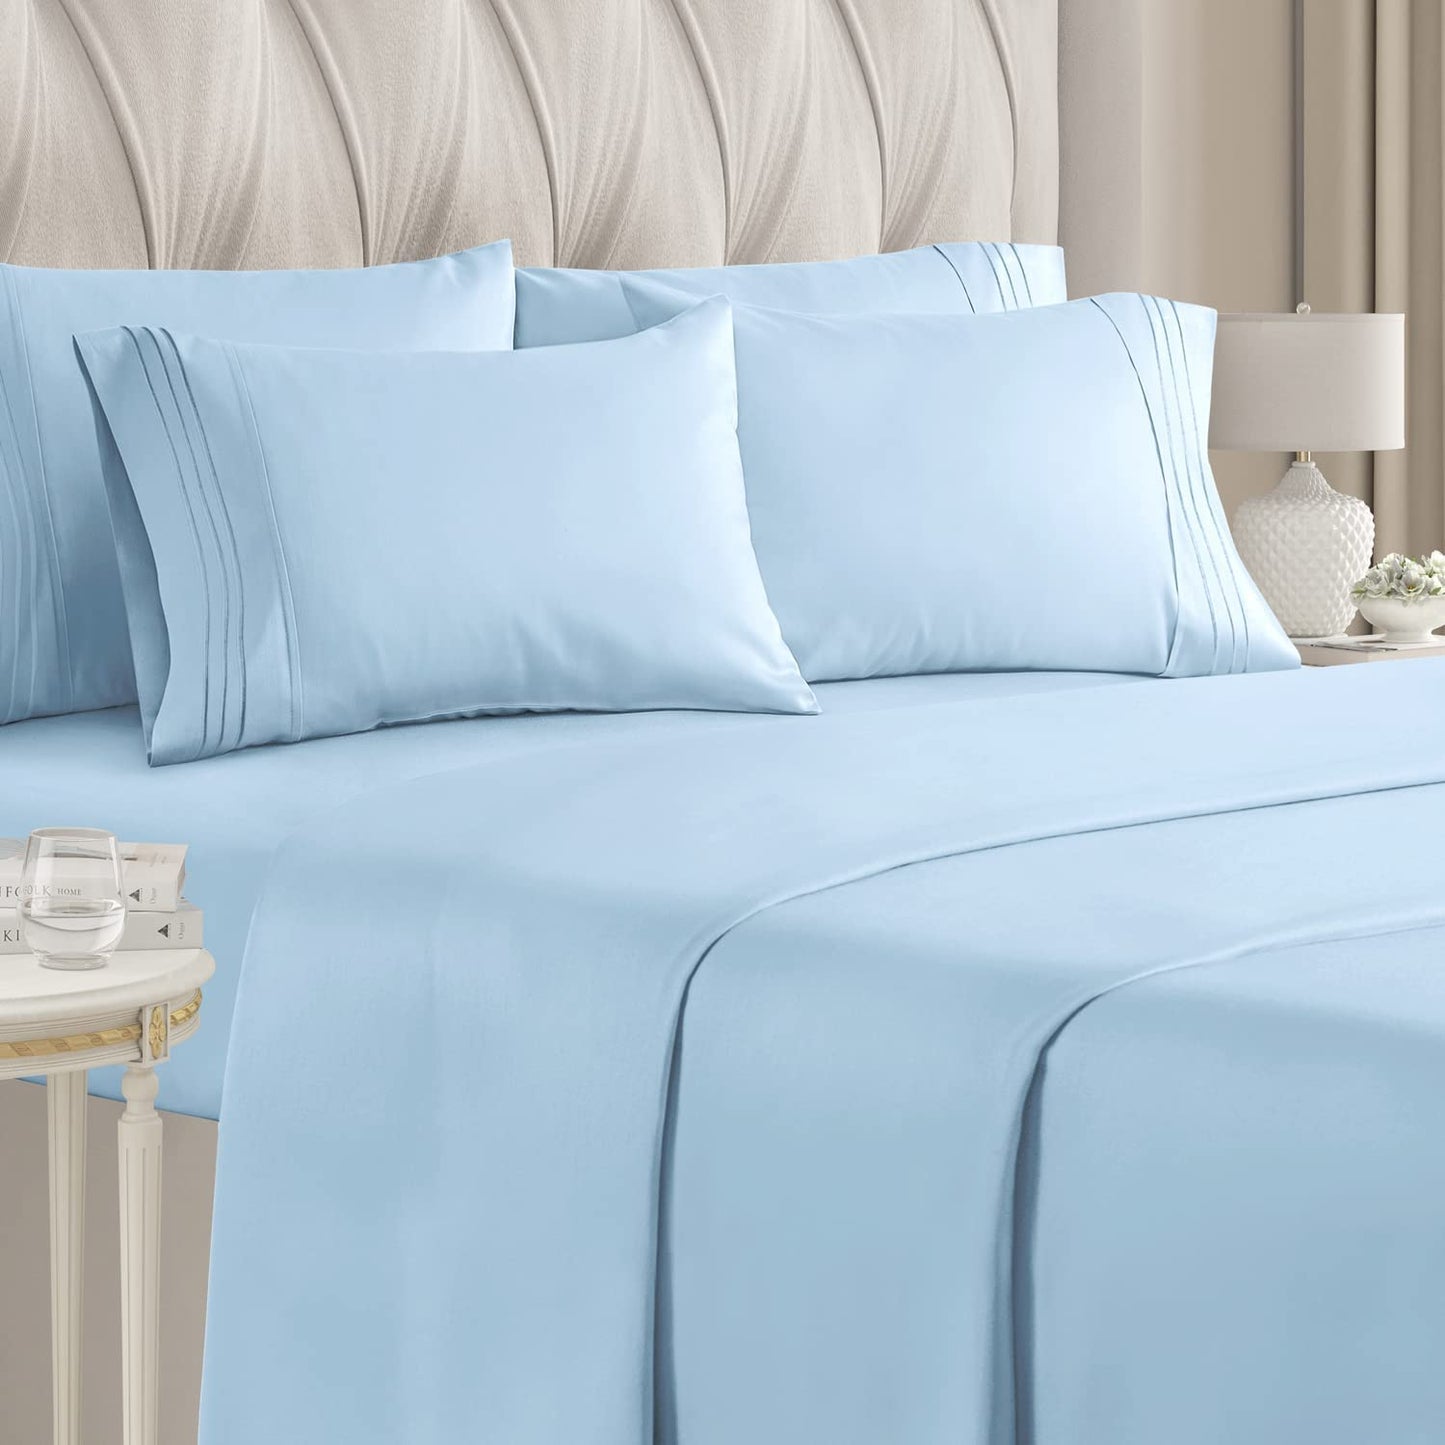 Buy 1000TC Solid Sheet Set Blue Color Egyptian Cotton at- Egyptianhomelinens.com